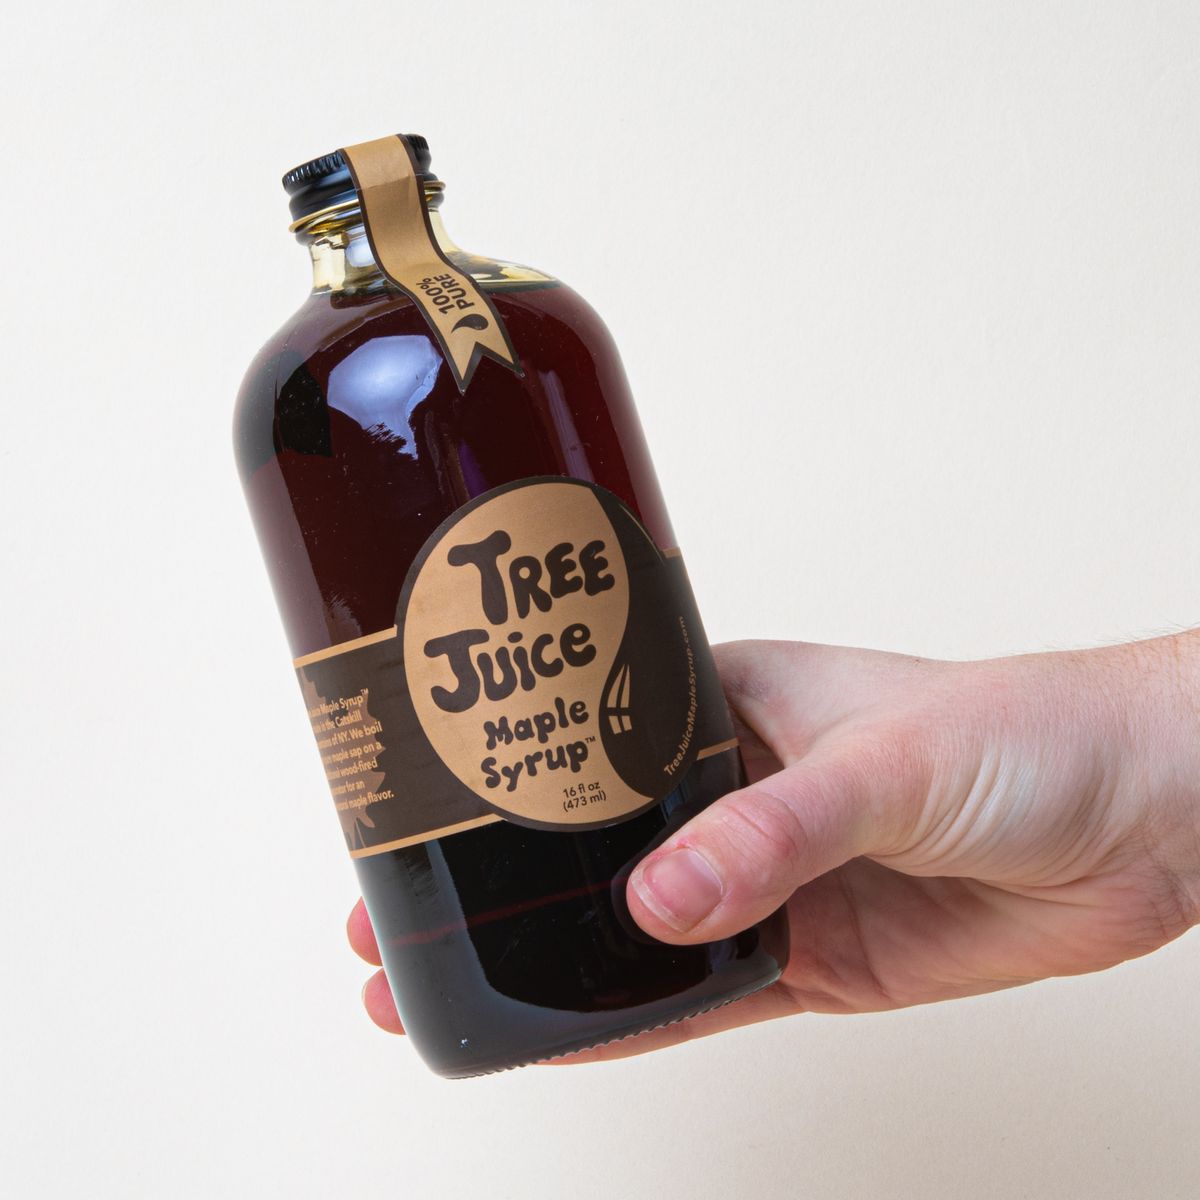 Hand holding a glass bottle with black cap filled with brown syrup and a label that reads "Tree Juice Maple Syrup"